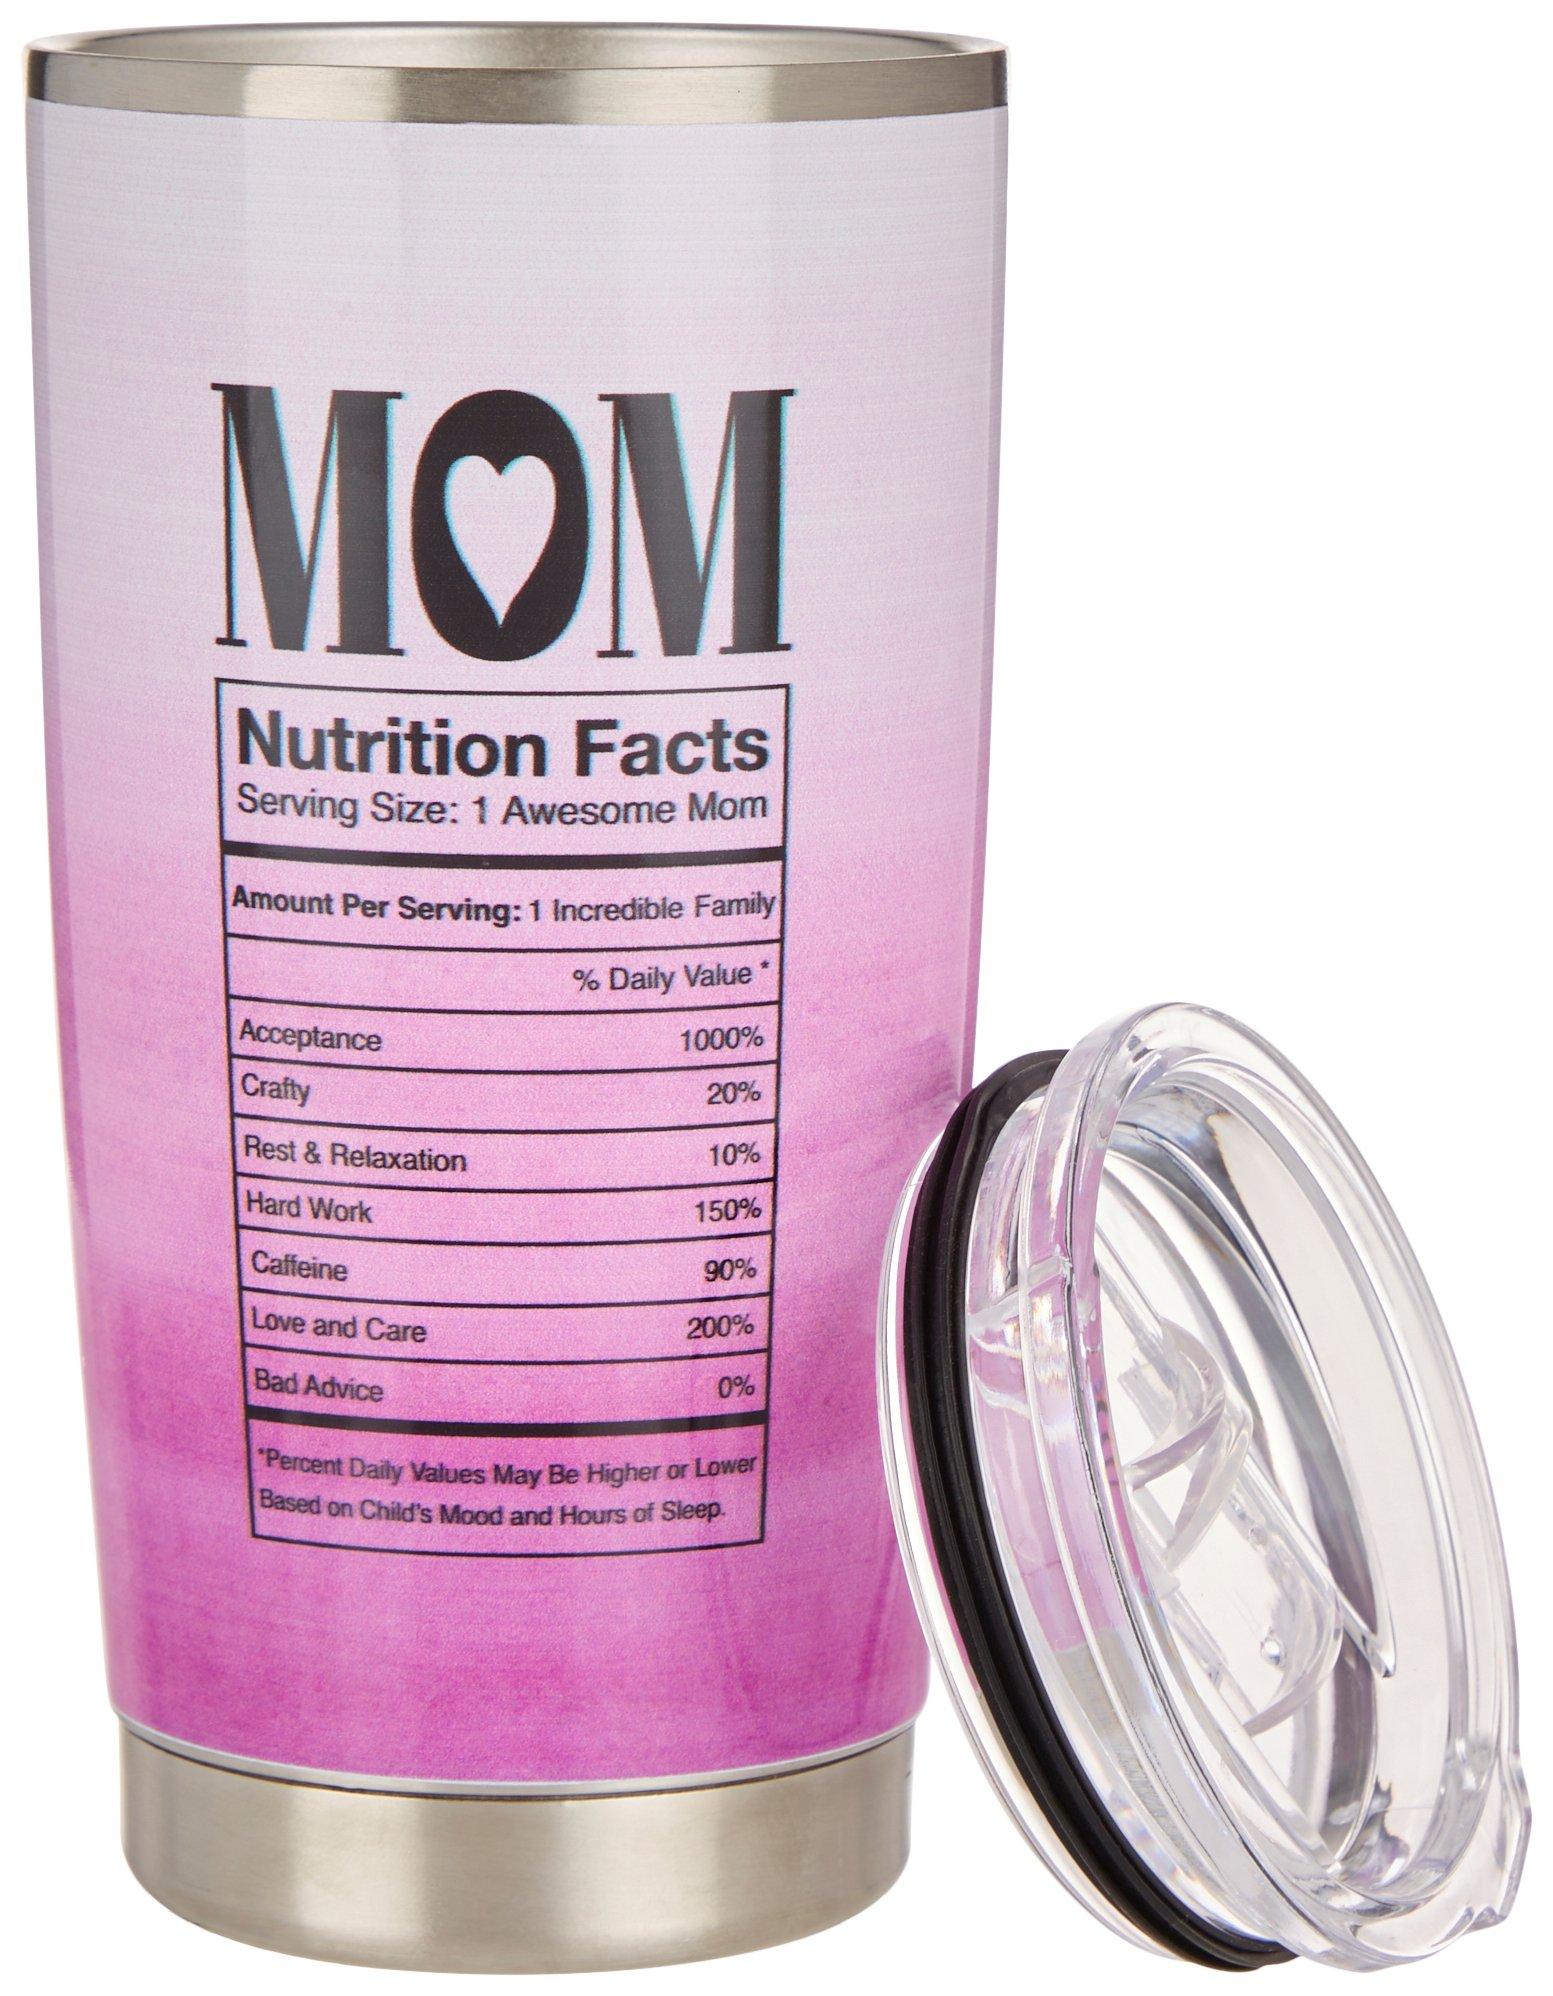 Meteor 20 oz. Stainless Steel Mom Nutrition Facts